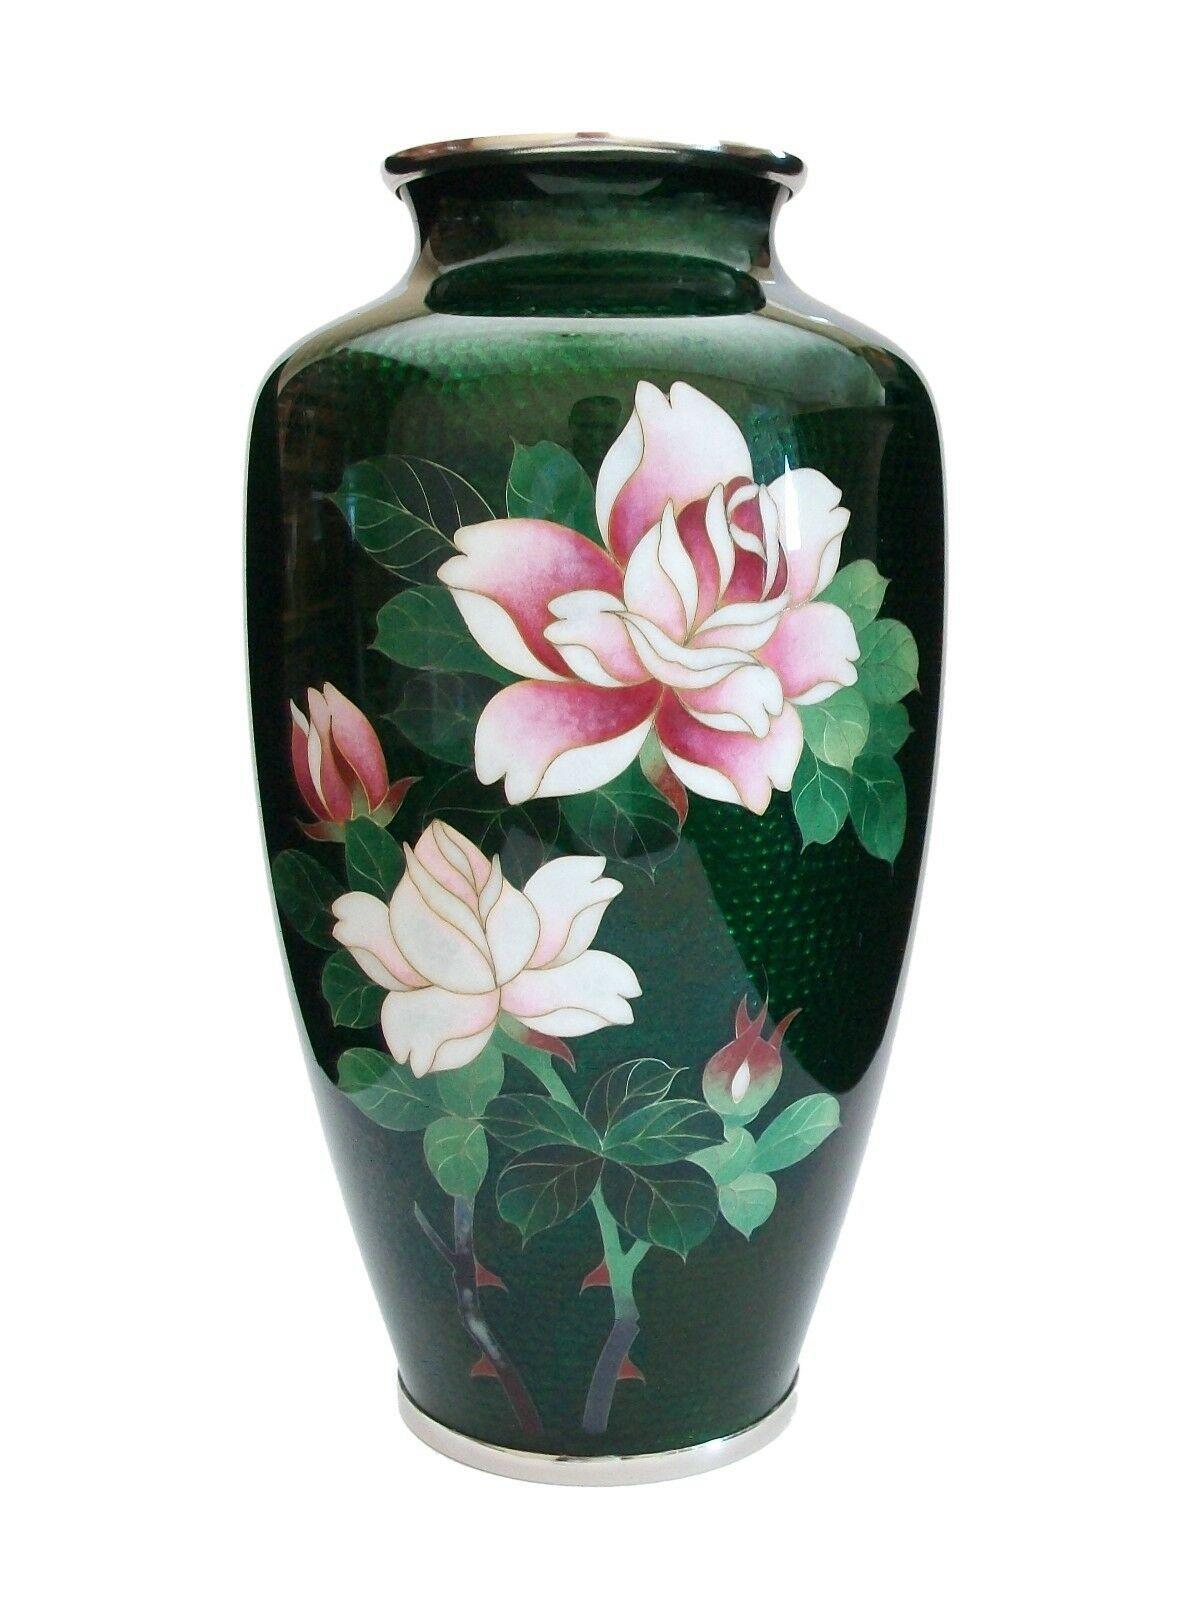 ANDO CLOISONNÉ COMPANY - Extraordinary cloisonné vase with roses and transparent green enamel over raised bamboo decoration - green enamel to the interior - white metal rim and base - signed on the base rim - Japan (Nagoya) - 20th